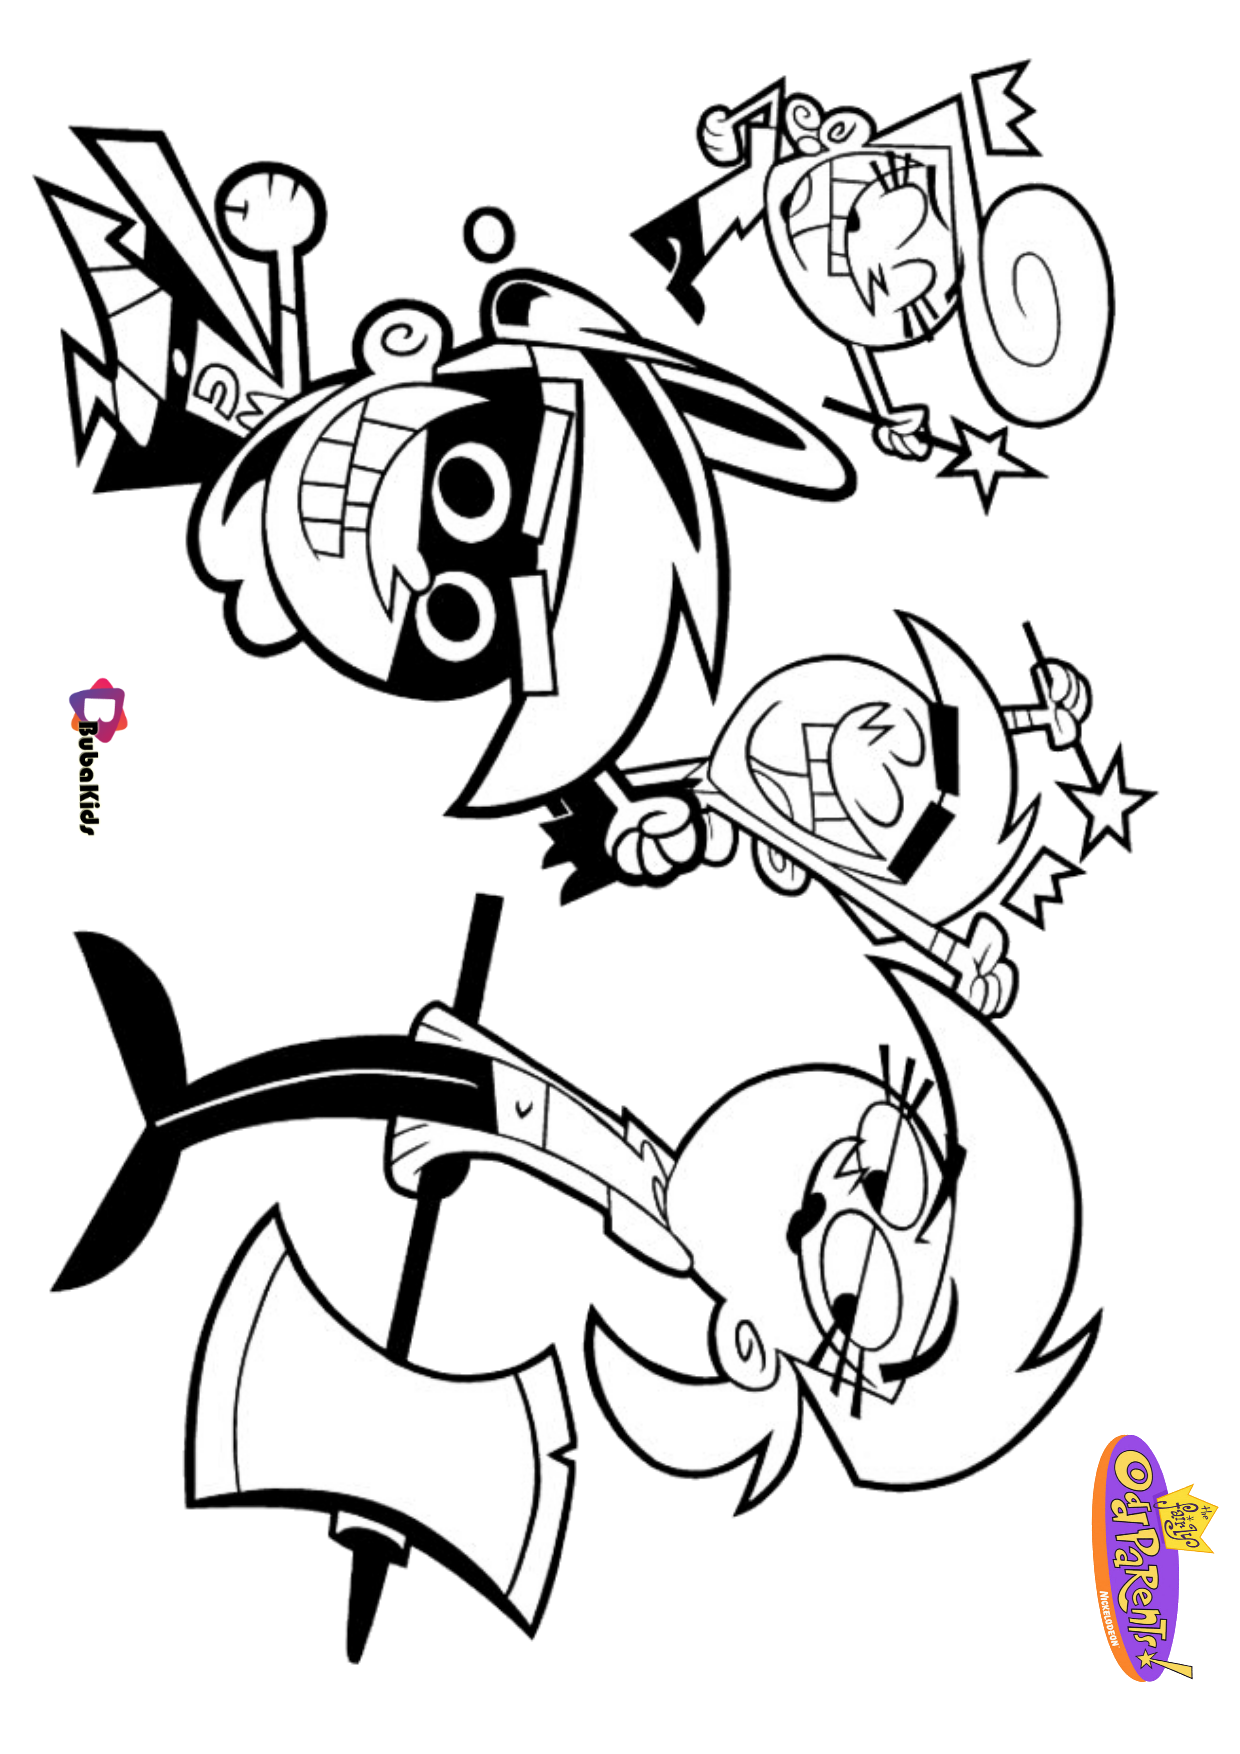 The fairly oddparents nick jr cartoon tv series coloring page